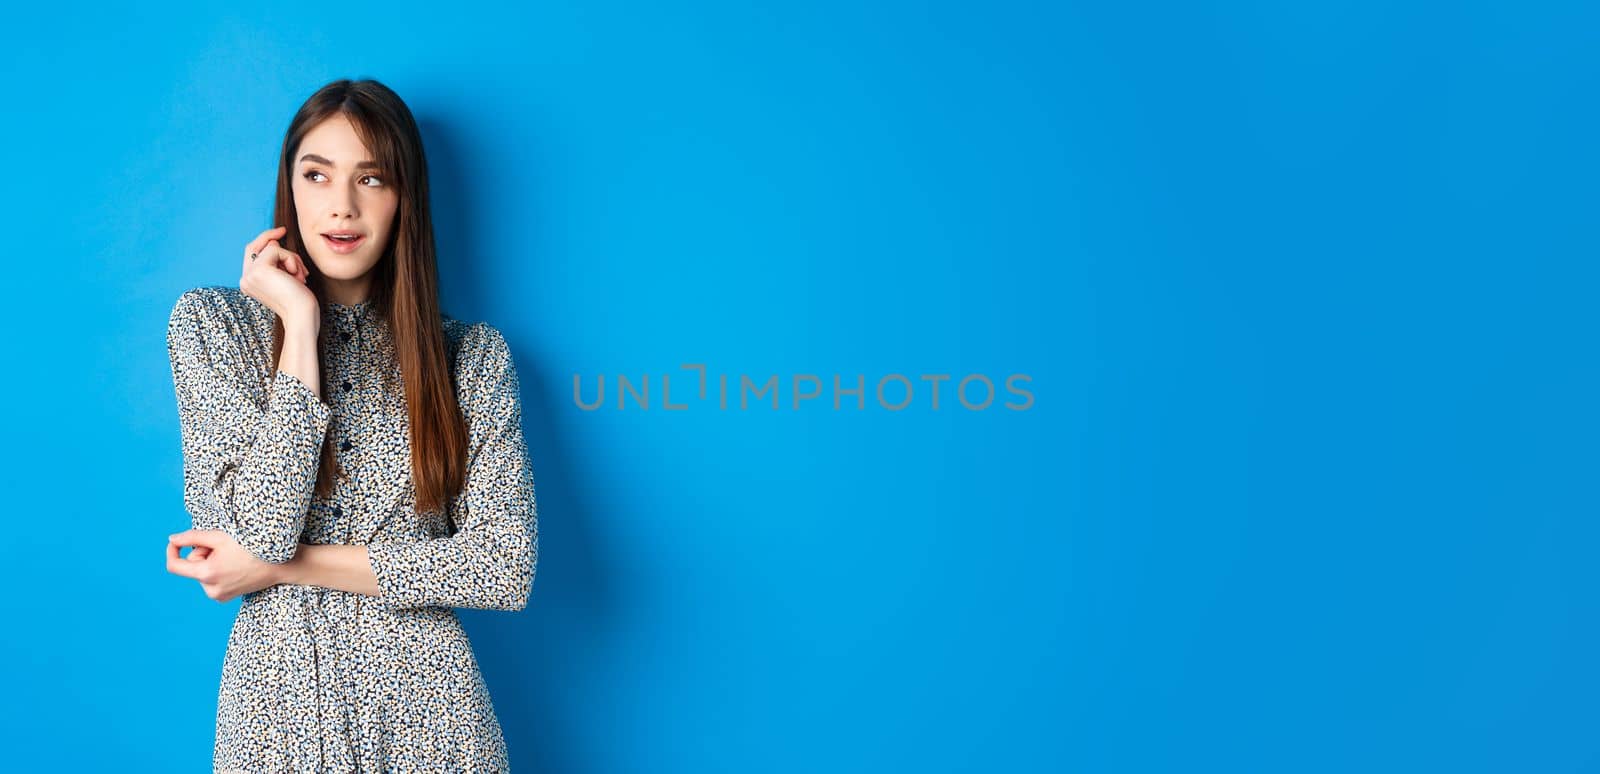 Pensive caucasian girl with long natural hair, wearing vintage dress, looking left with thoughtful face, standing on blue background.